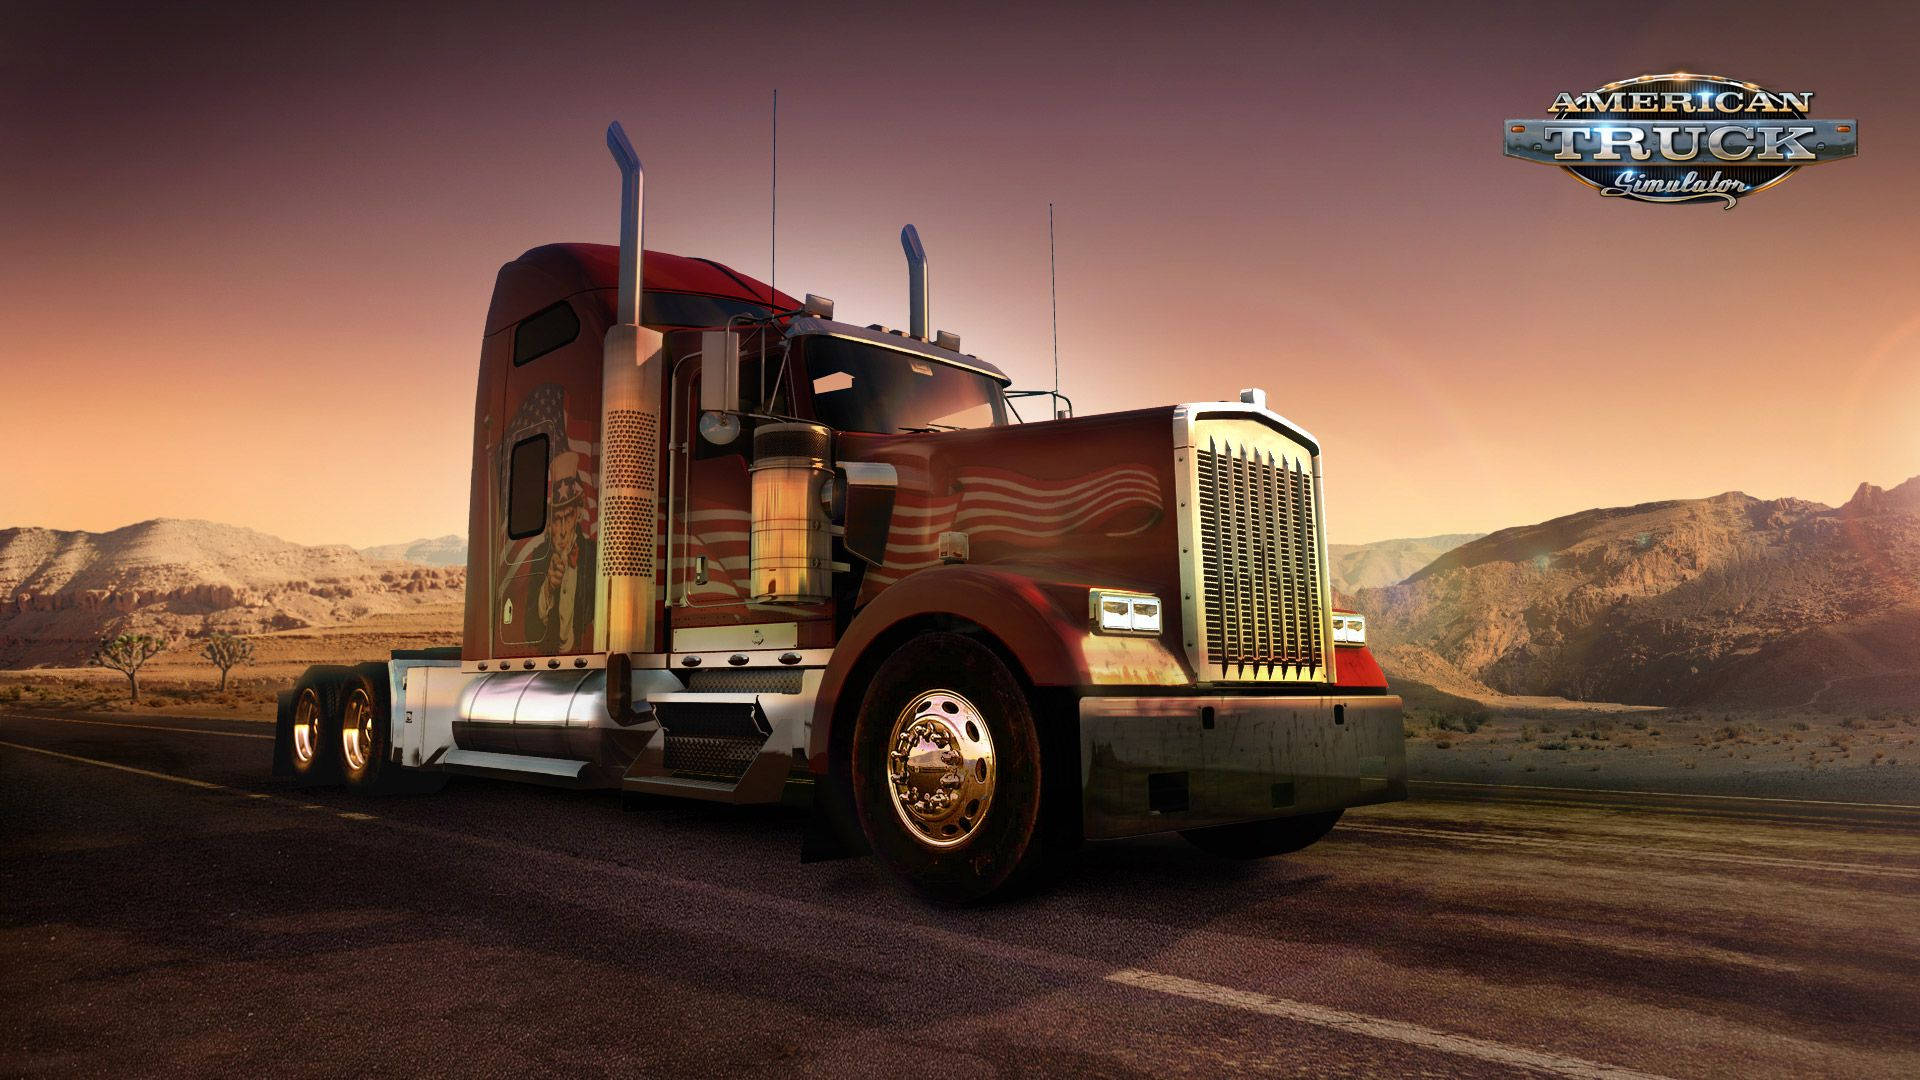 Caption: Majestic American Highway - American Truck Simulator Driving Experience Wallpaper